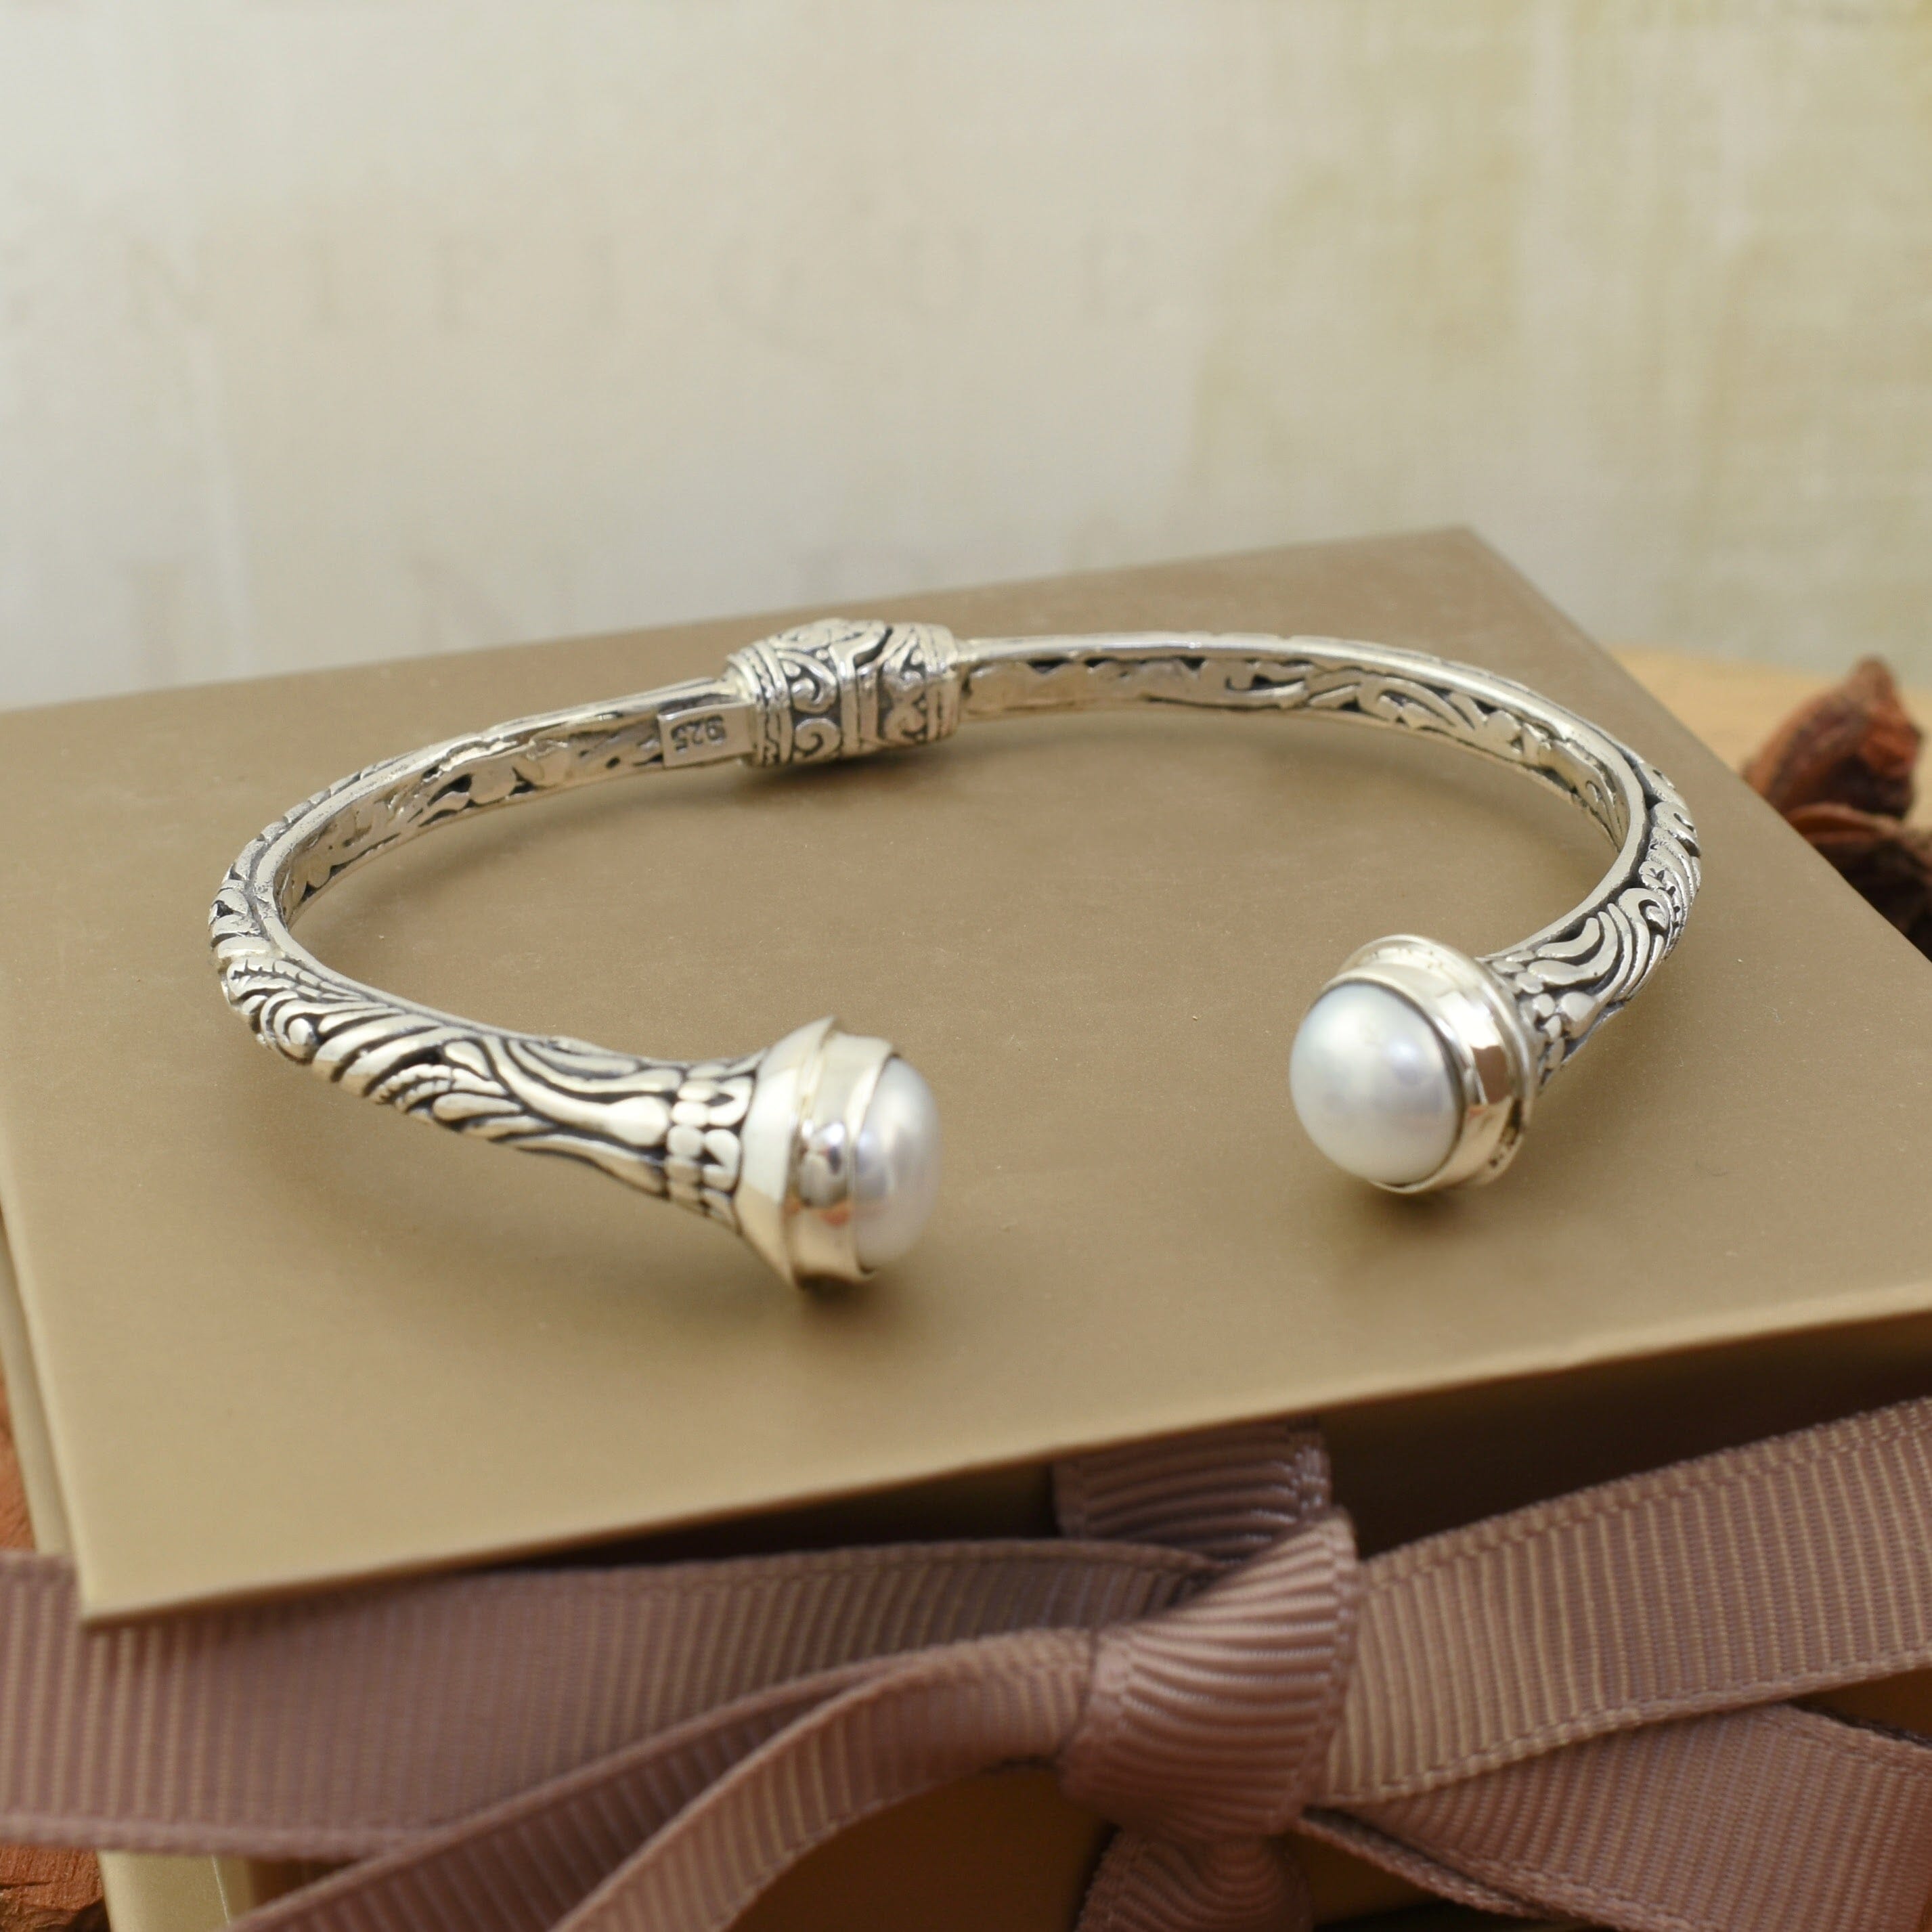 Handcrafted sterling silver and pearl cuff